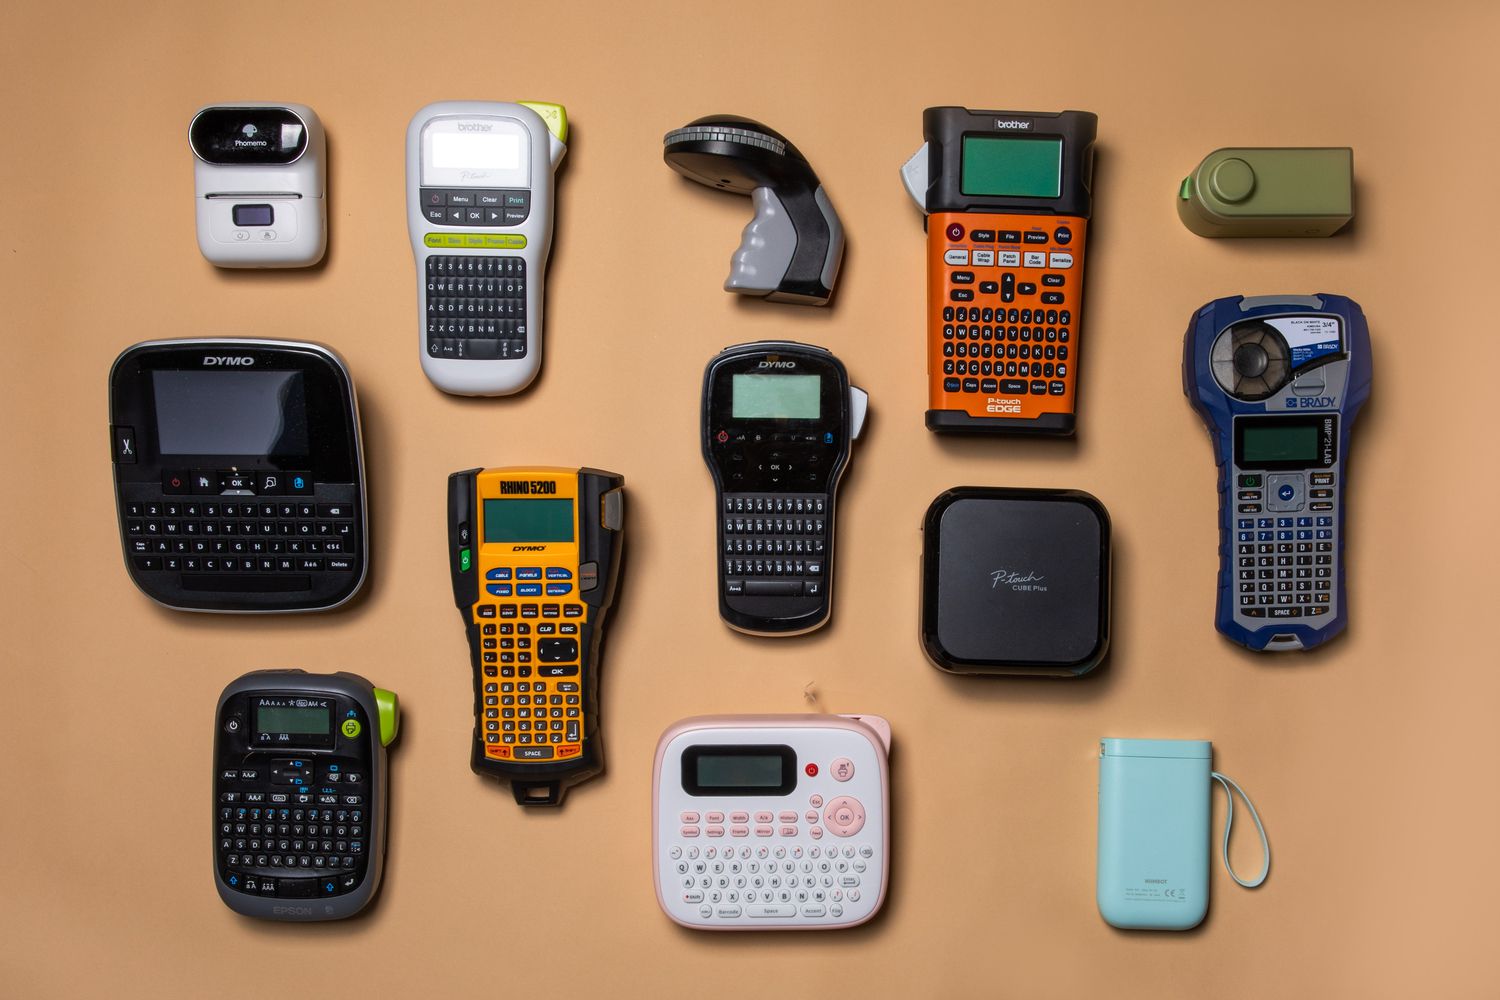 The Best Label Makers to Organize Any Area of Your Home